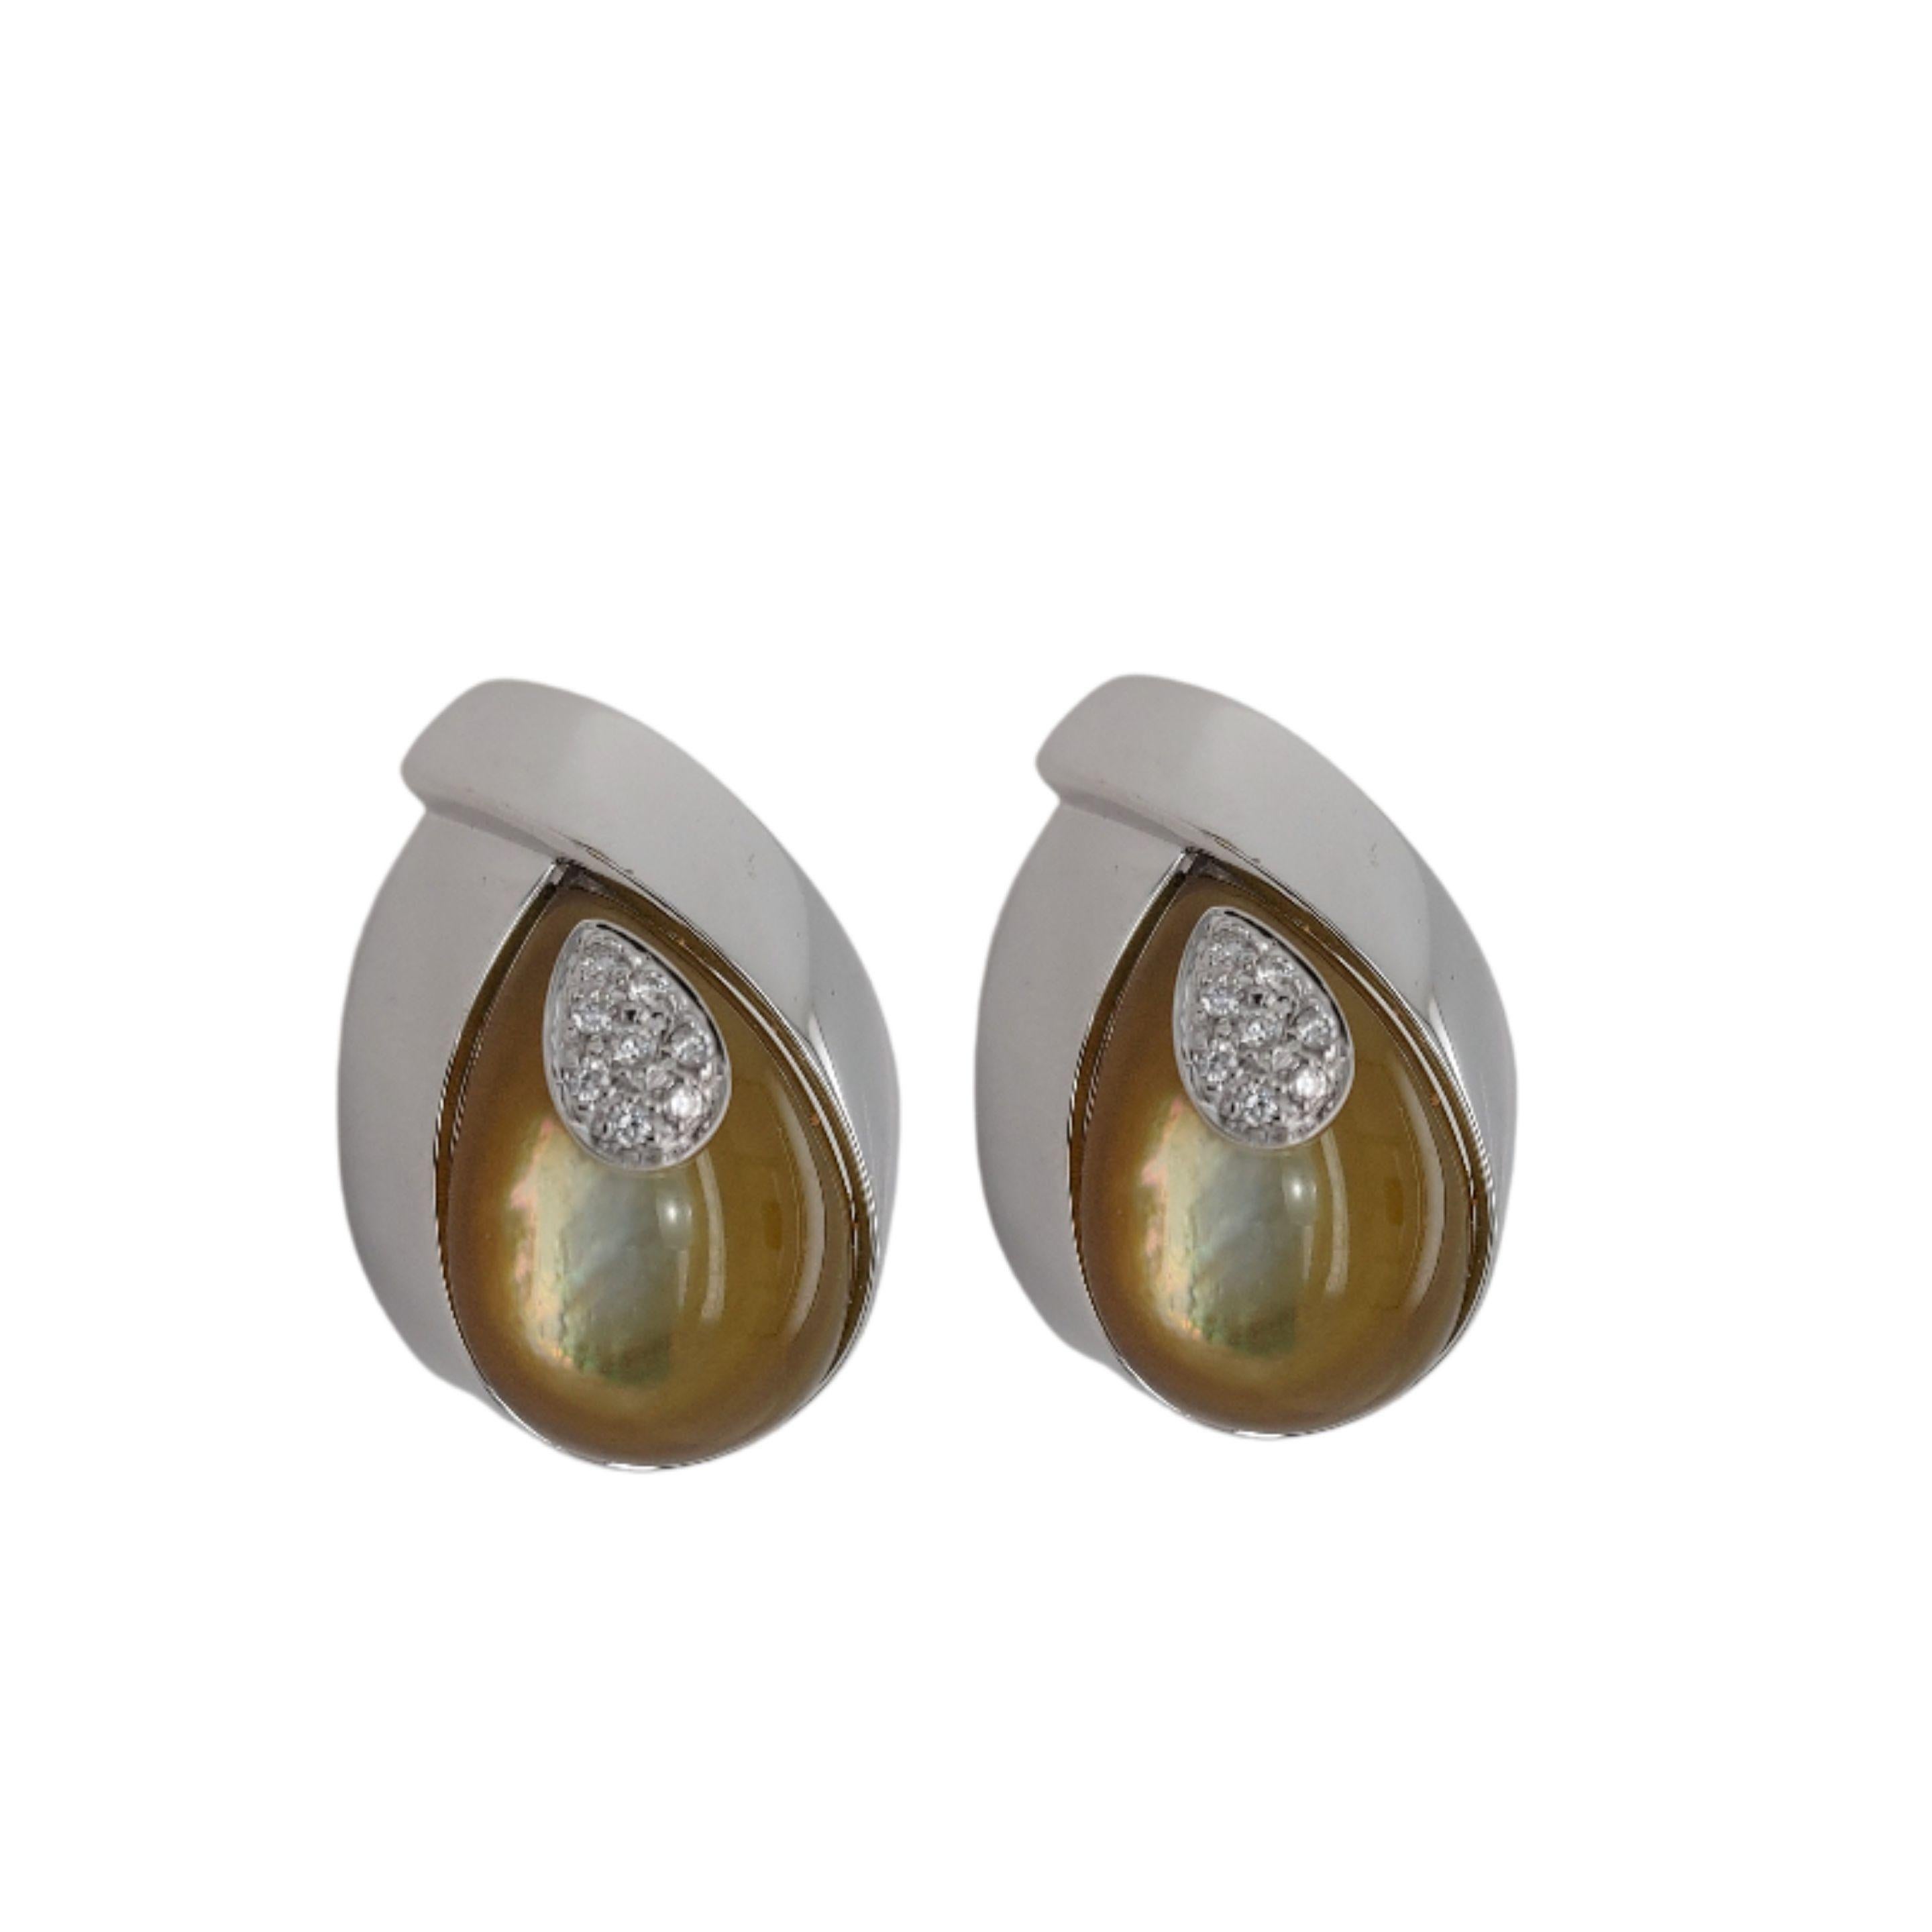 Artisan Talento Italiano Earrings in 18kt White Gold with 0.20 Carat Diamonds For Sale